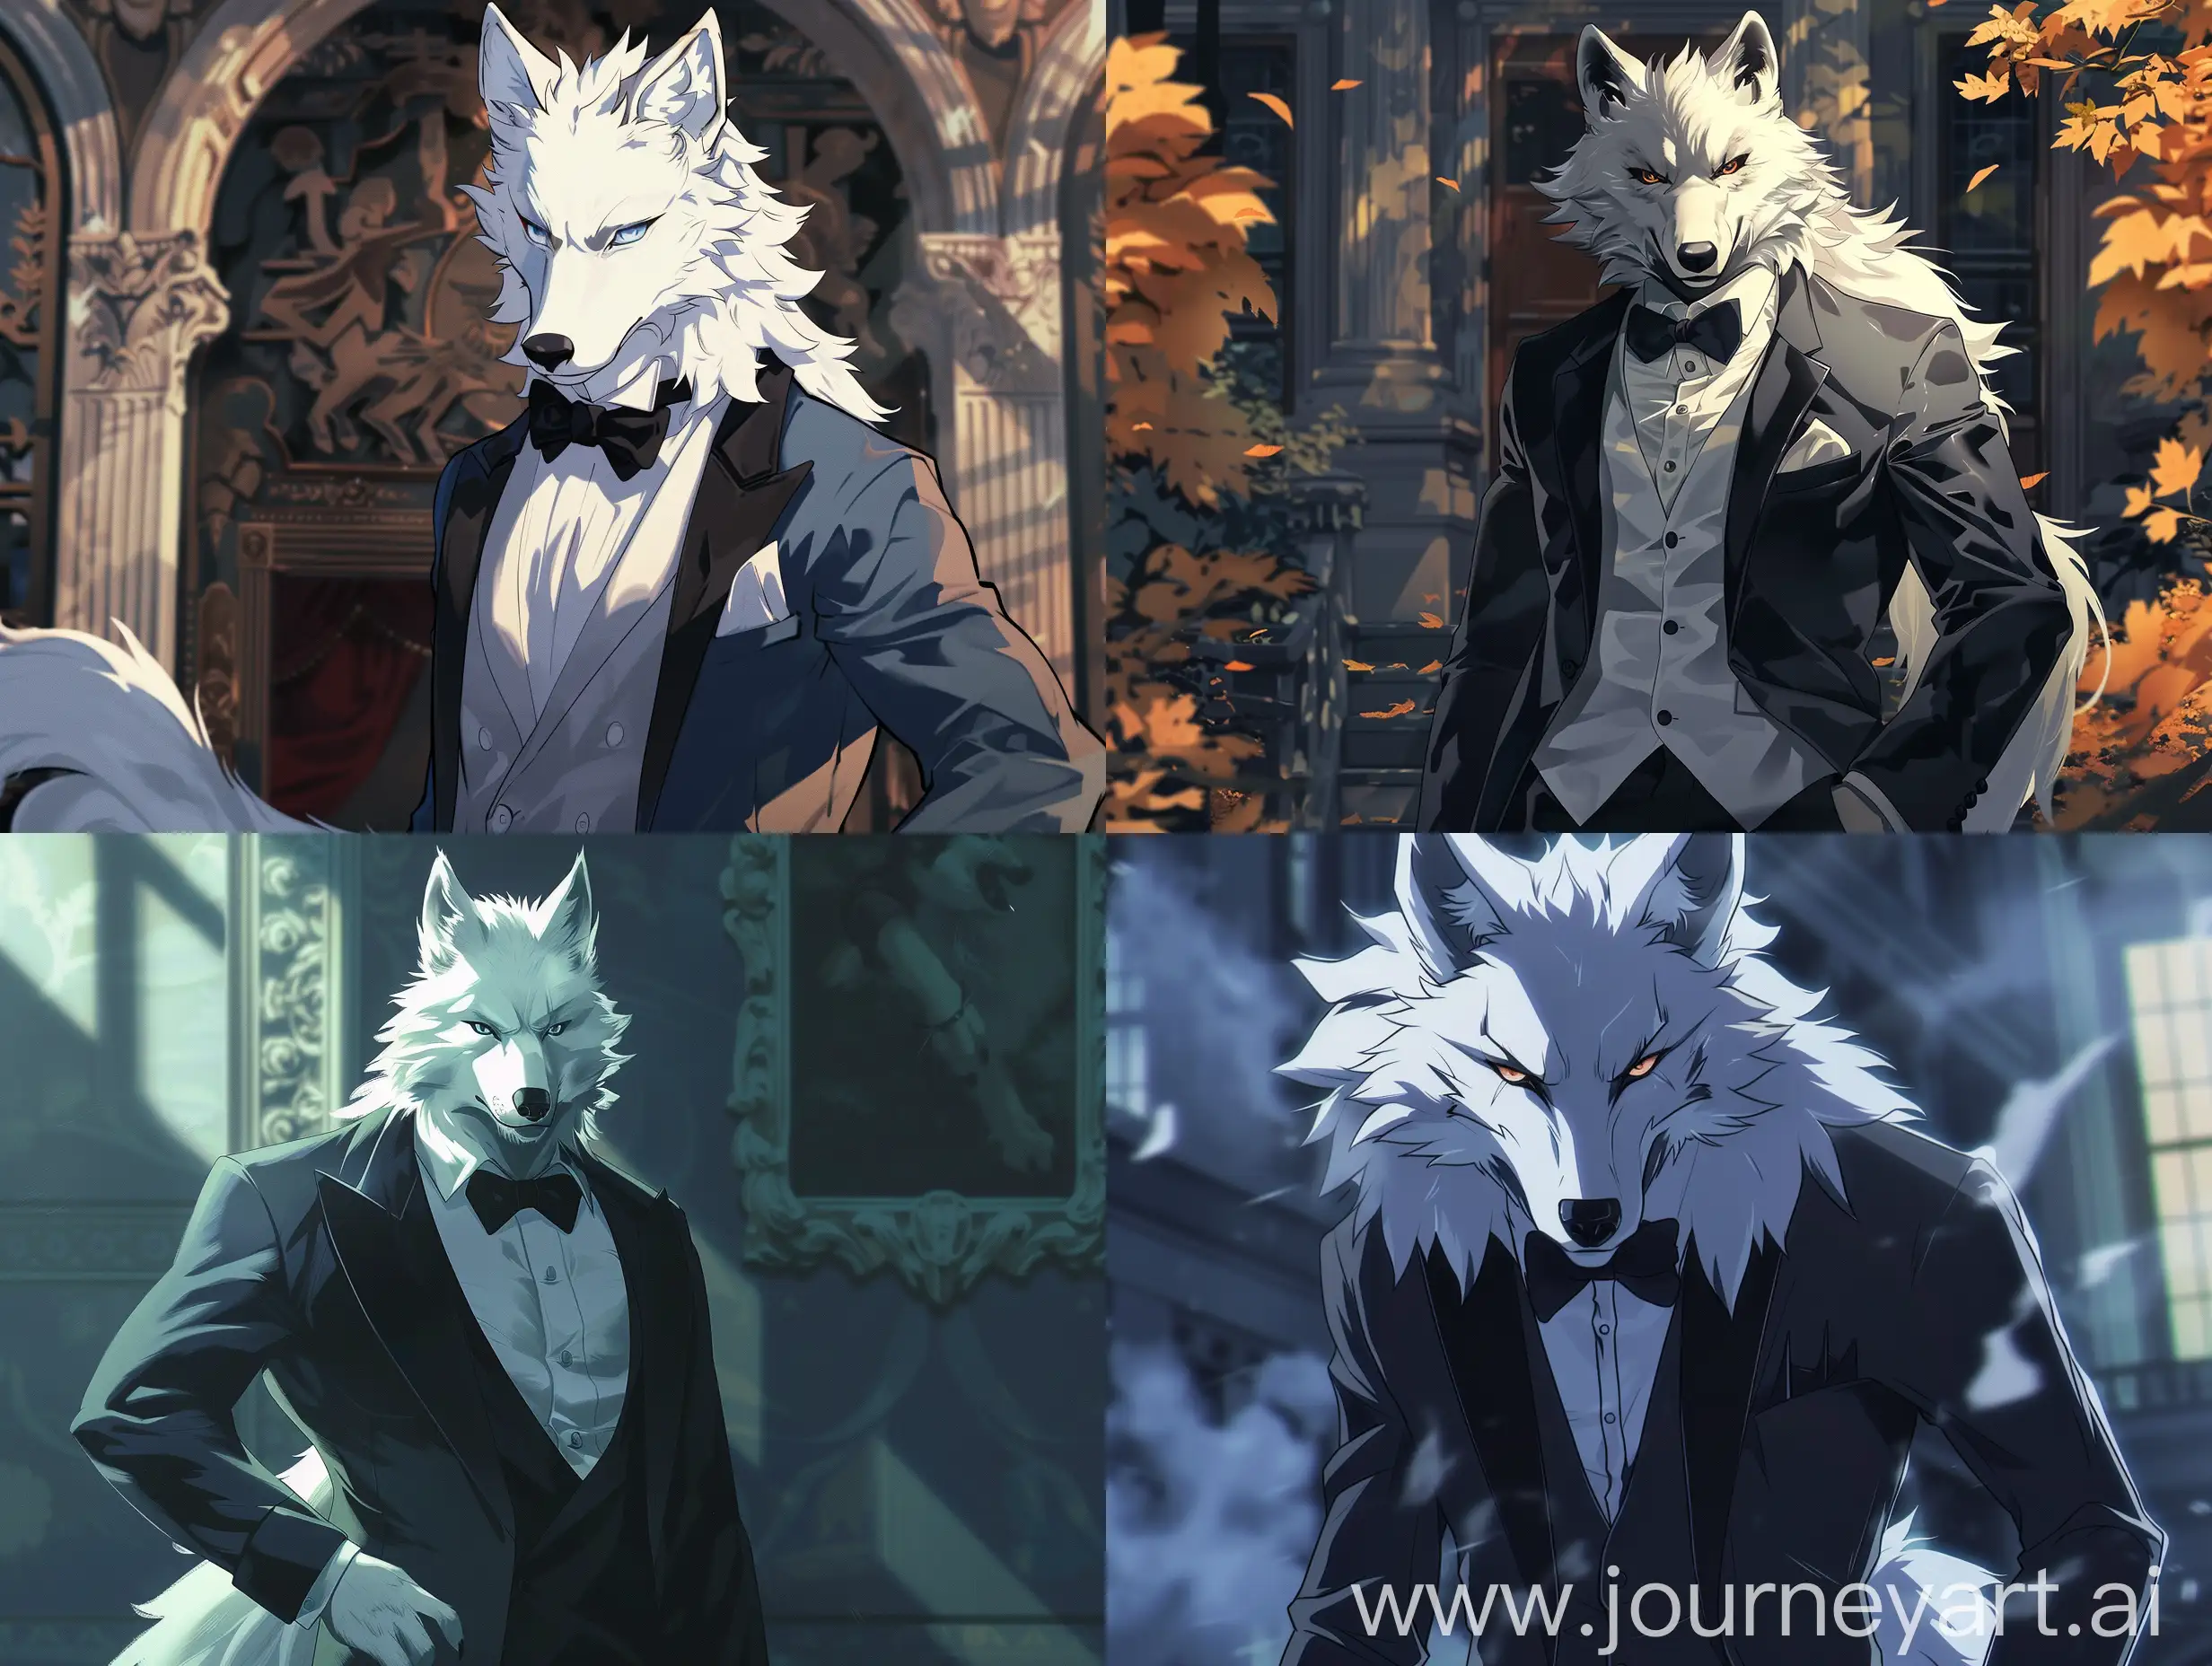 An anime muscular anthropomorphic white wolf in a tuxedo